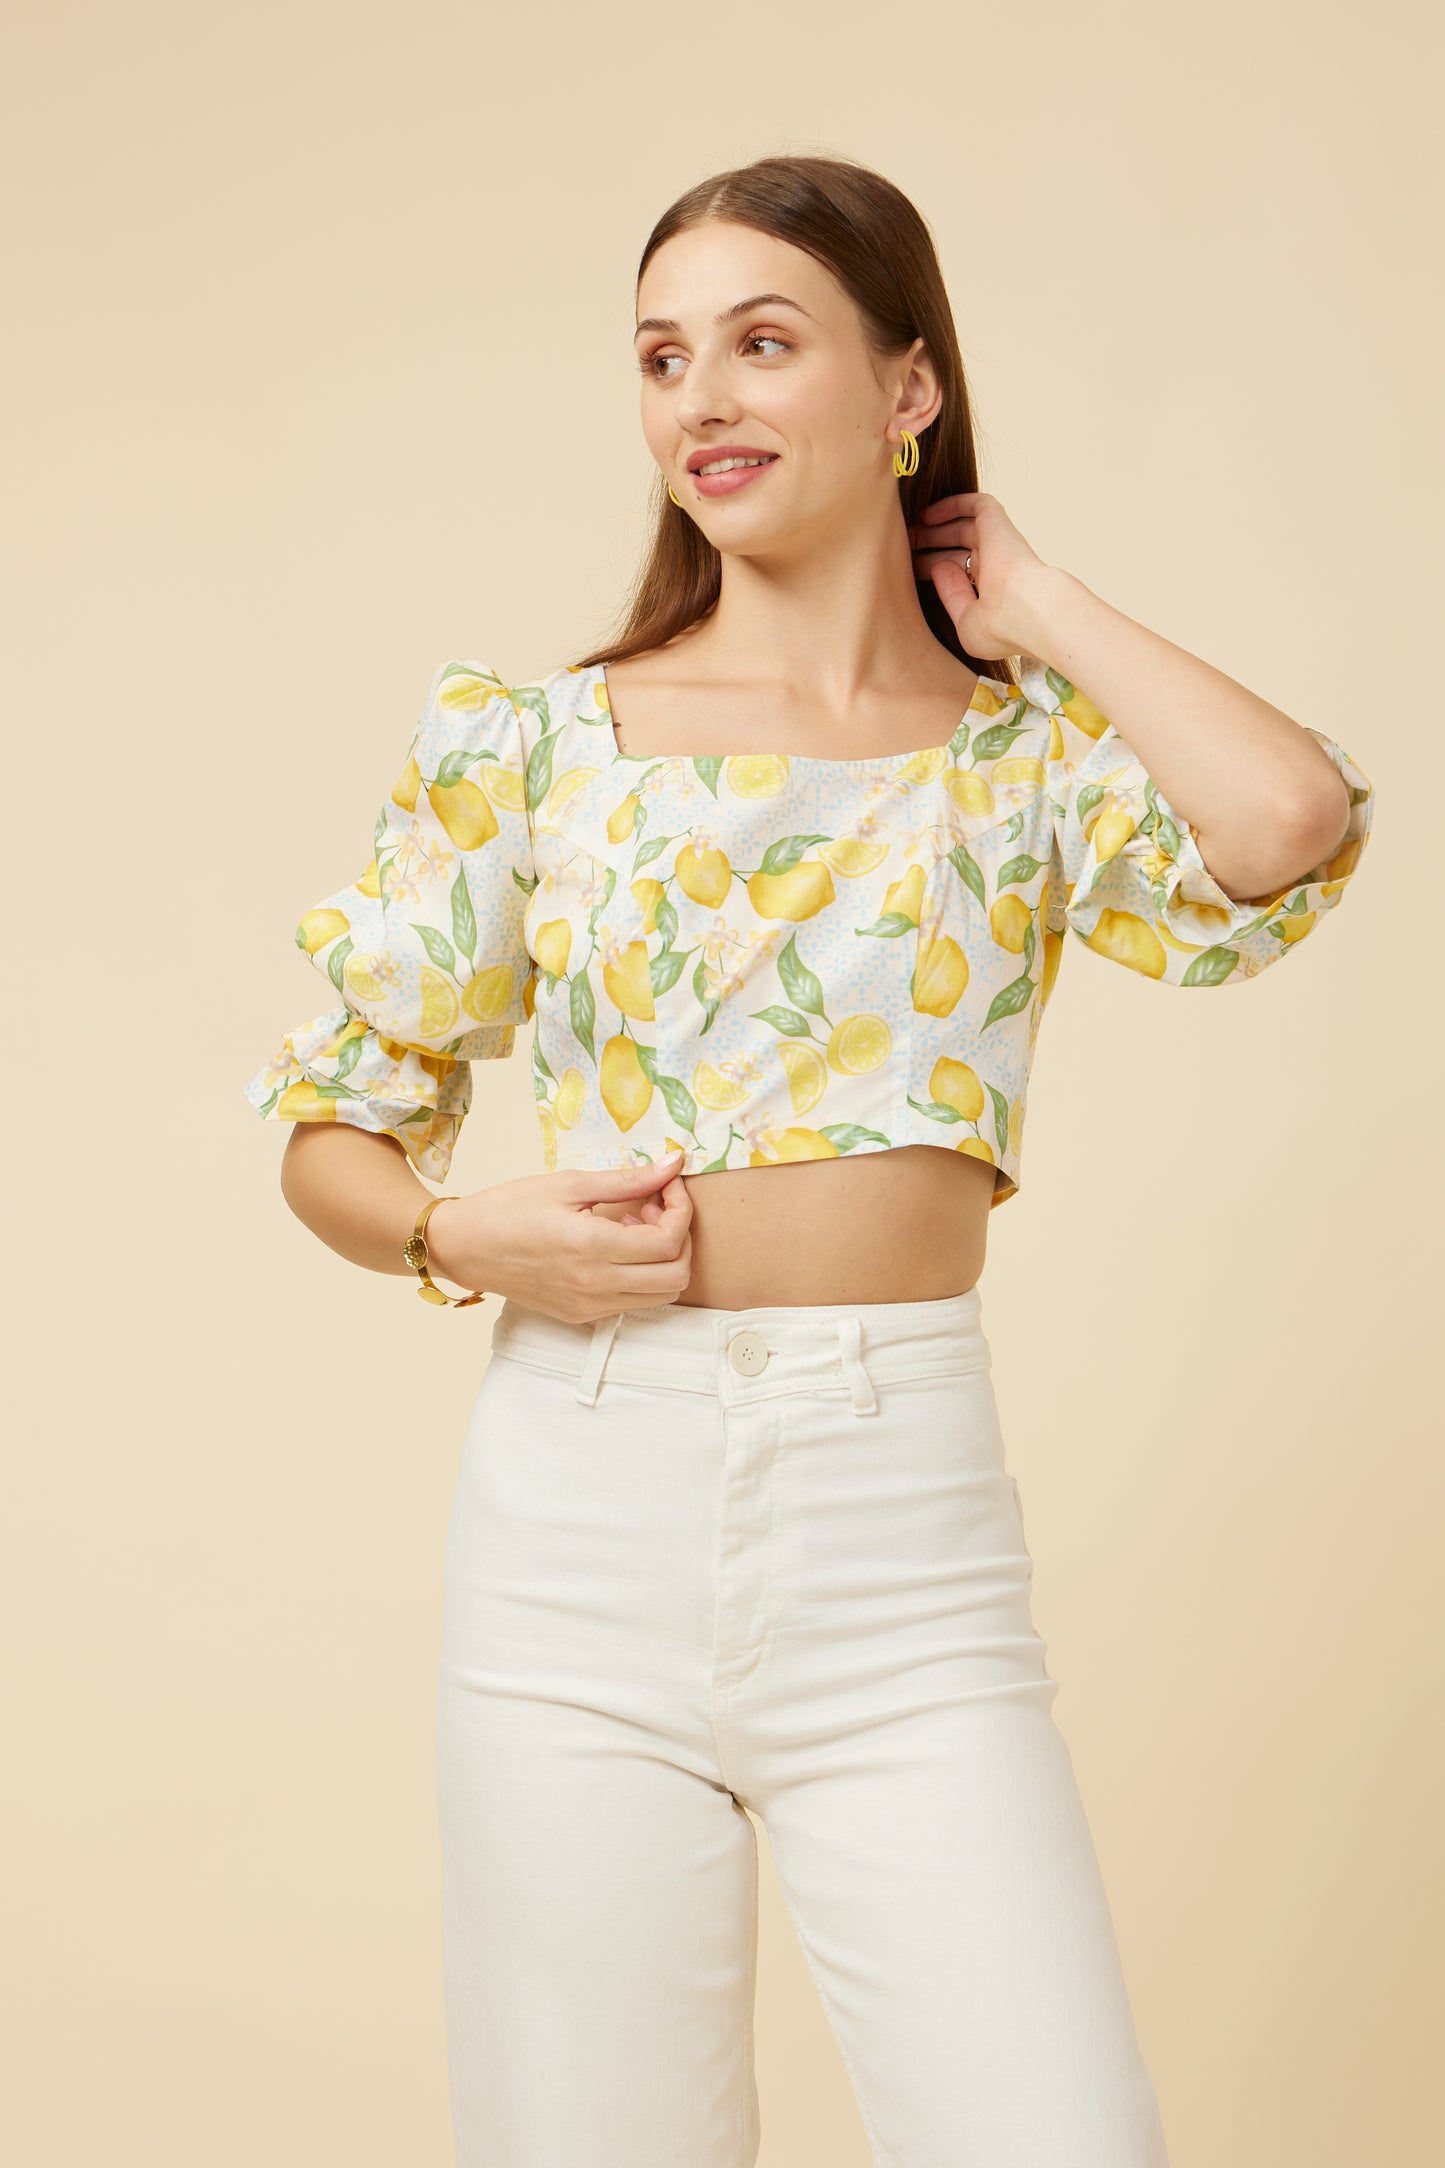 Model touches her hair, showcasing the Citrus Dream Crop Top's rectangle neckline and vibrant lemon print, complemented by puff elbow-length sleeves with playful frill ends, exuding a fresh and summery vibe.